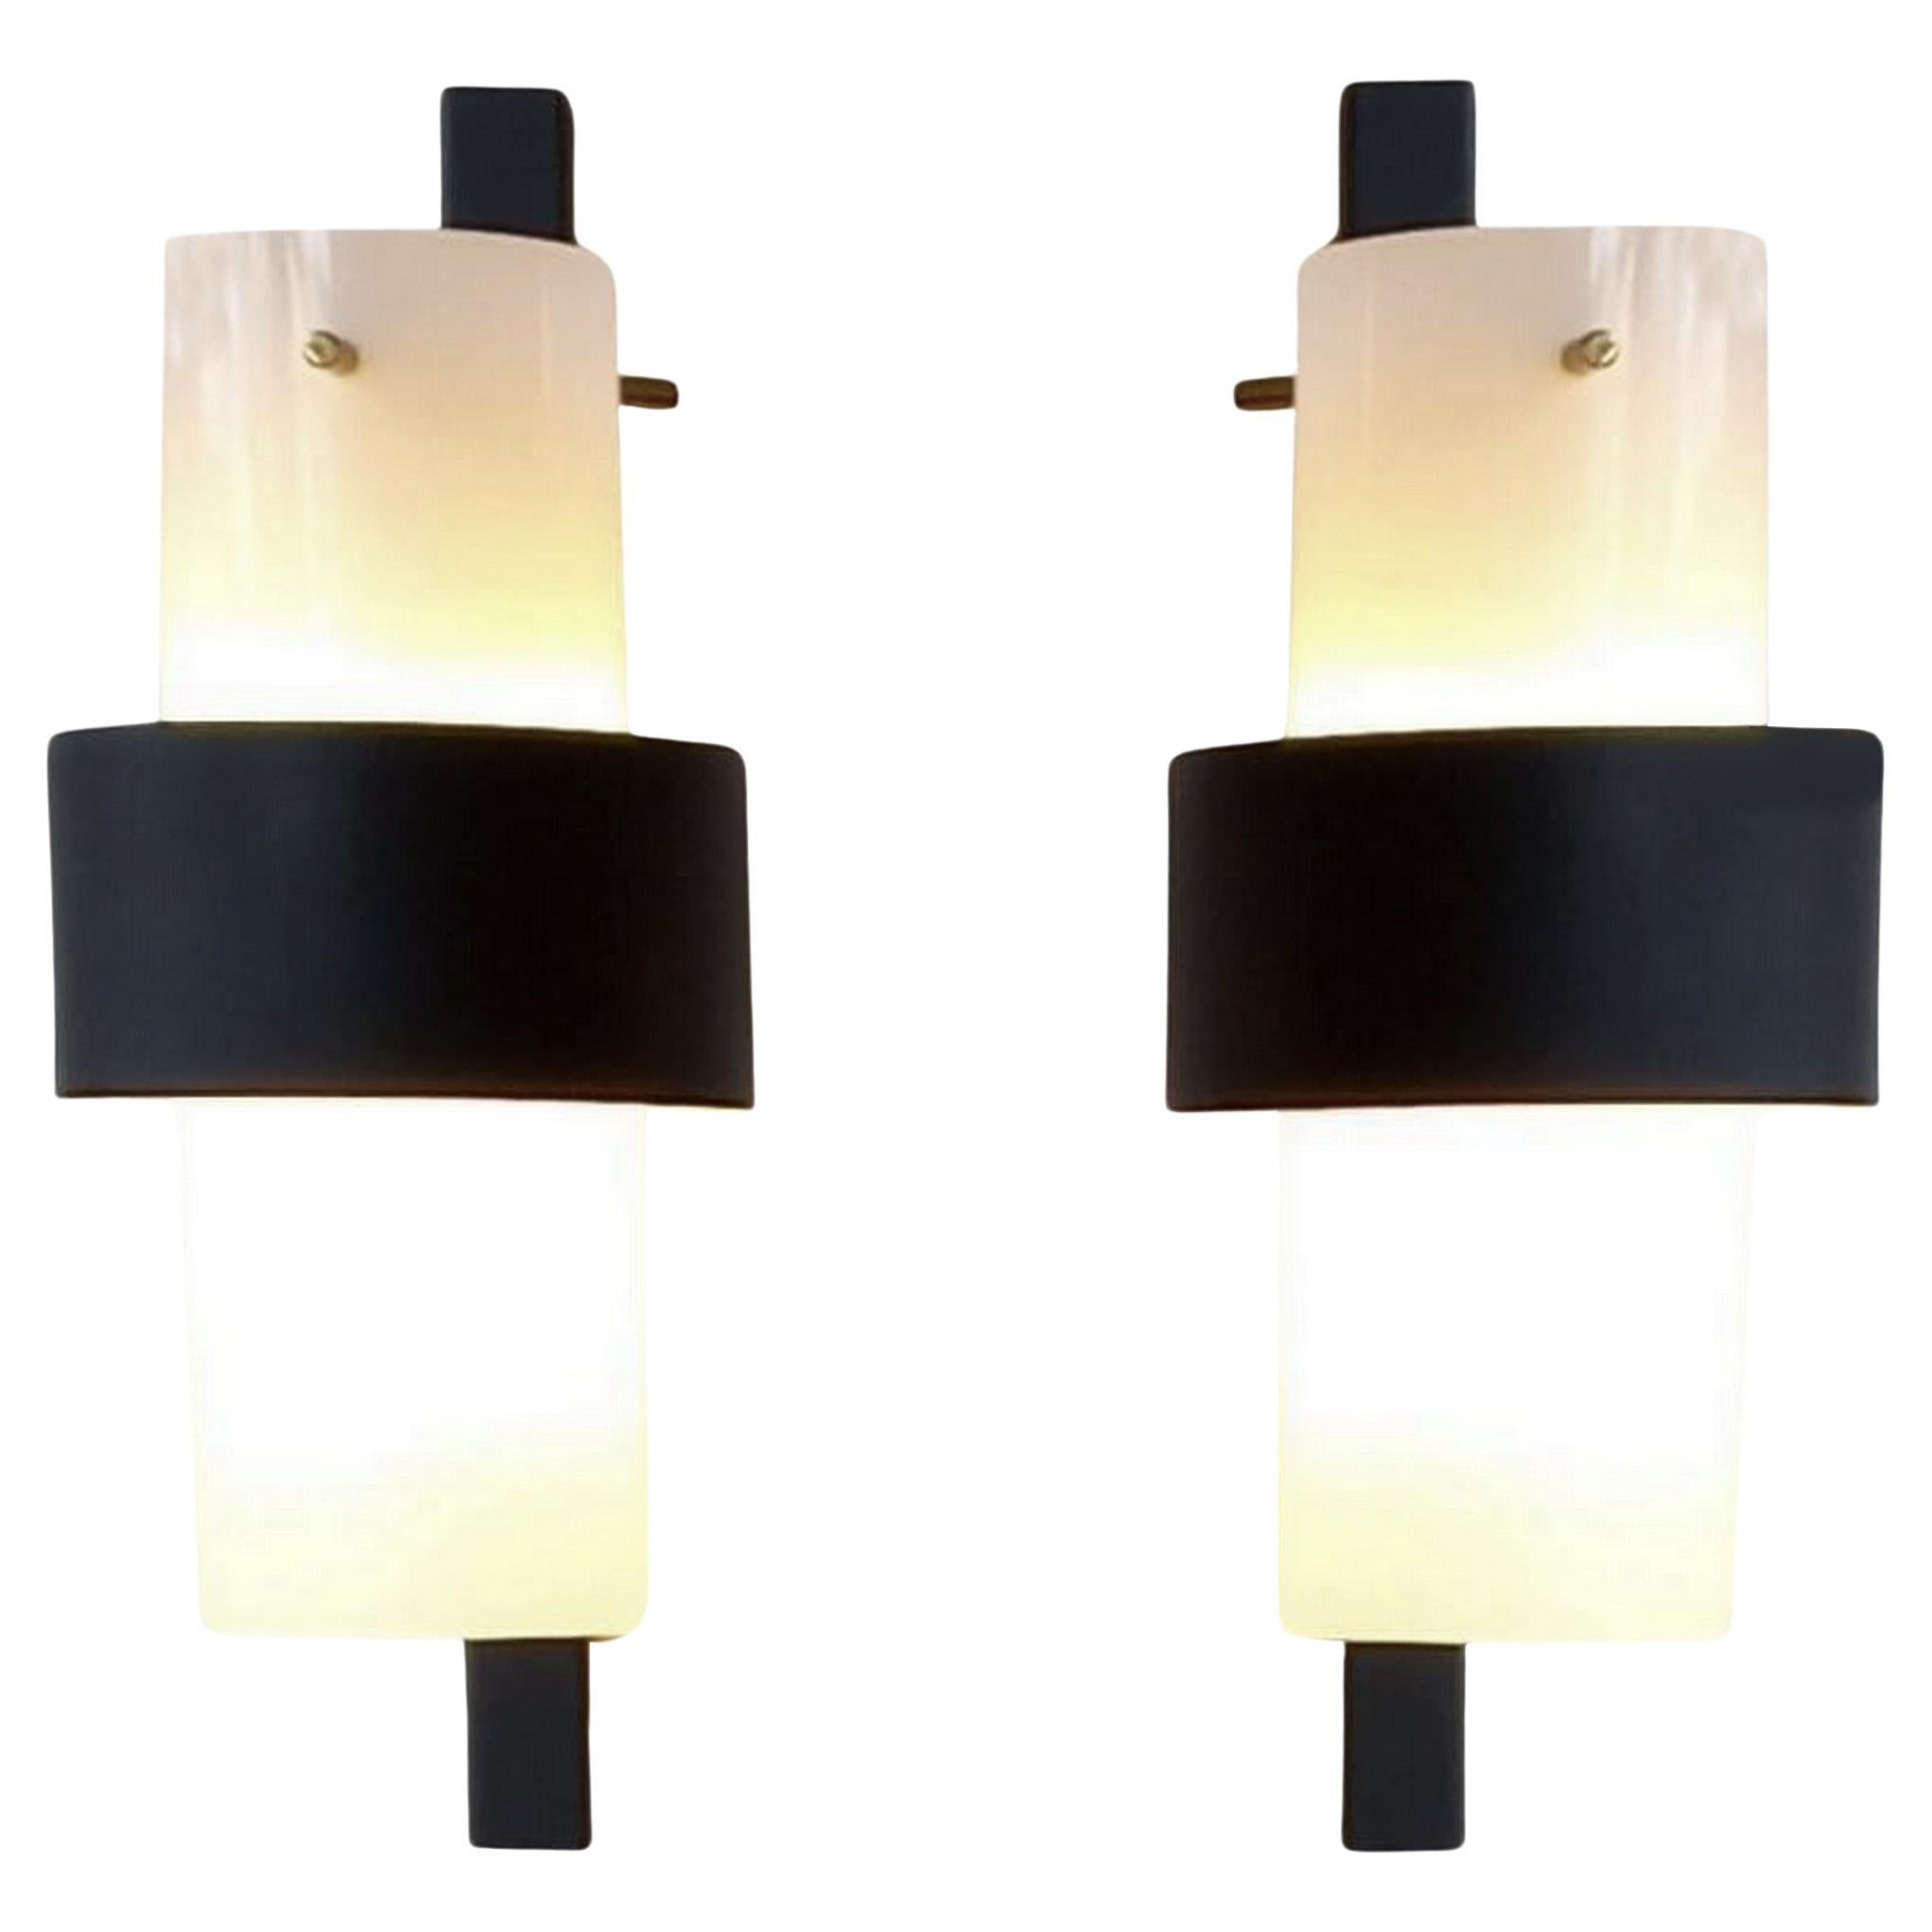 Pair of wall lights in perspex, brass, lacquered metal, Lunel, France circa 1960